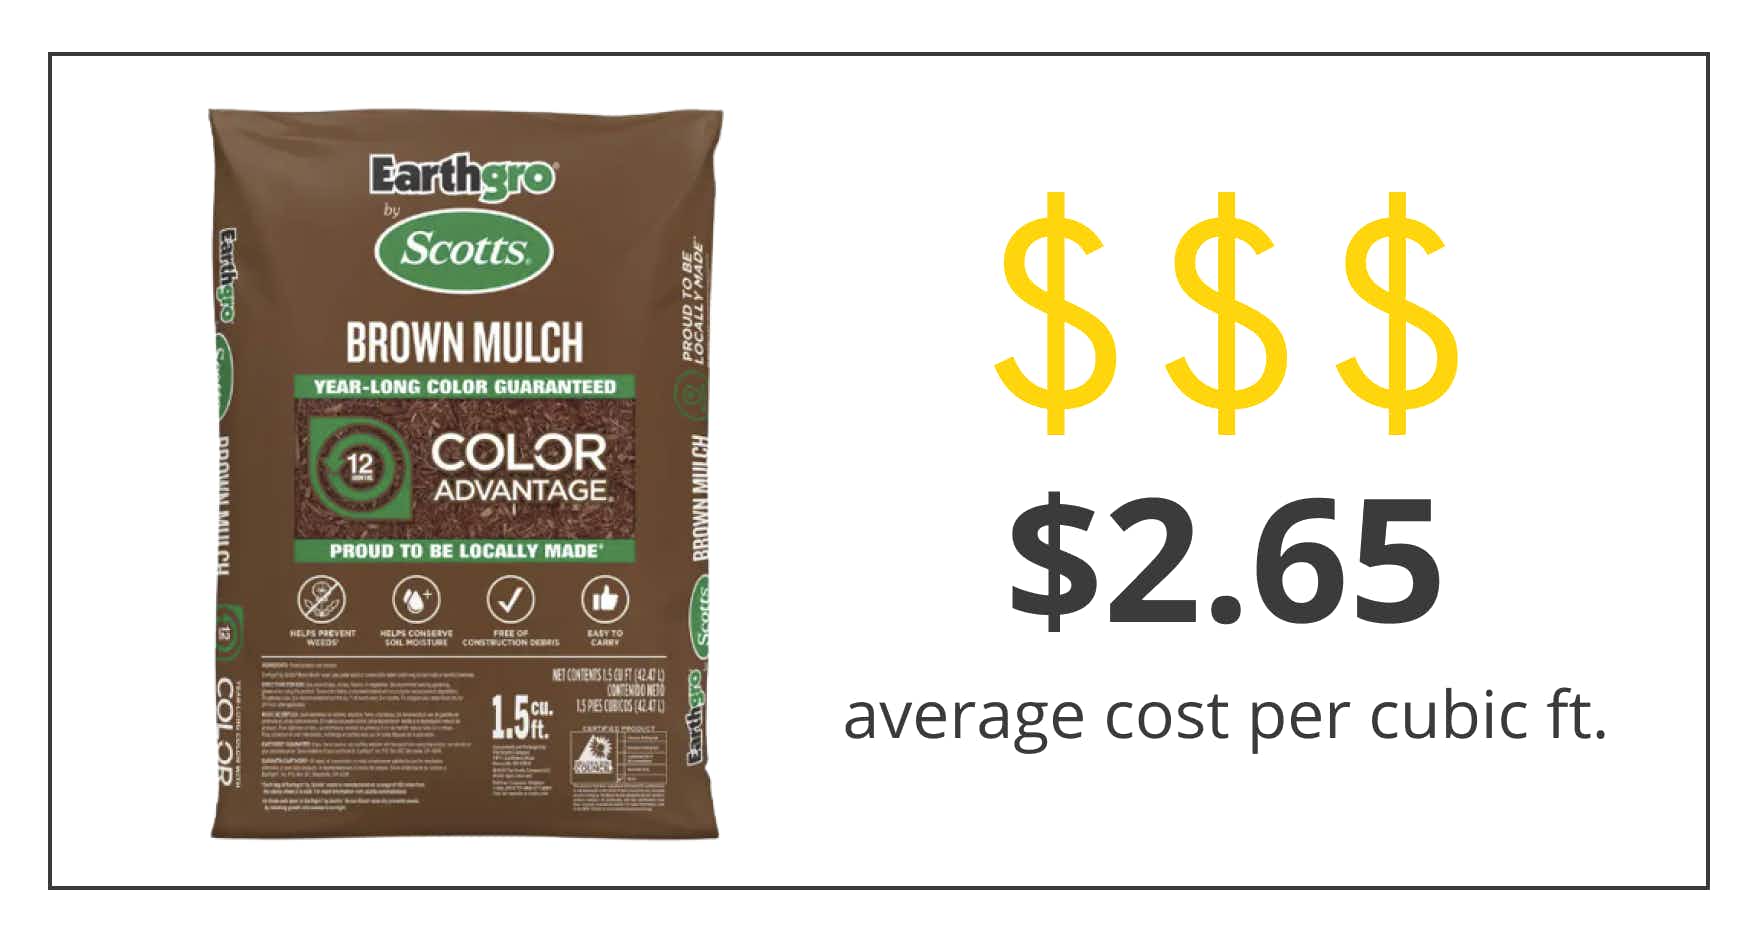 a graphic showing a bag of scotts earthgro mulch at home depot has an average cost of $2.65 per cubic foot